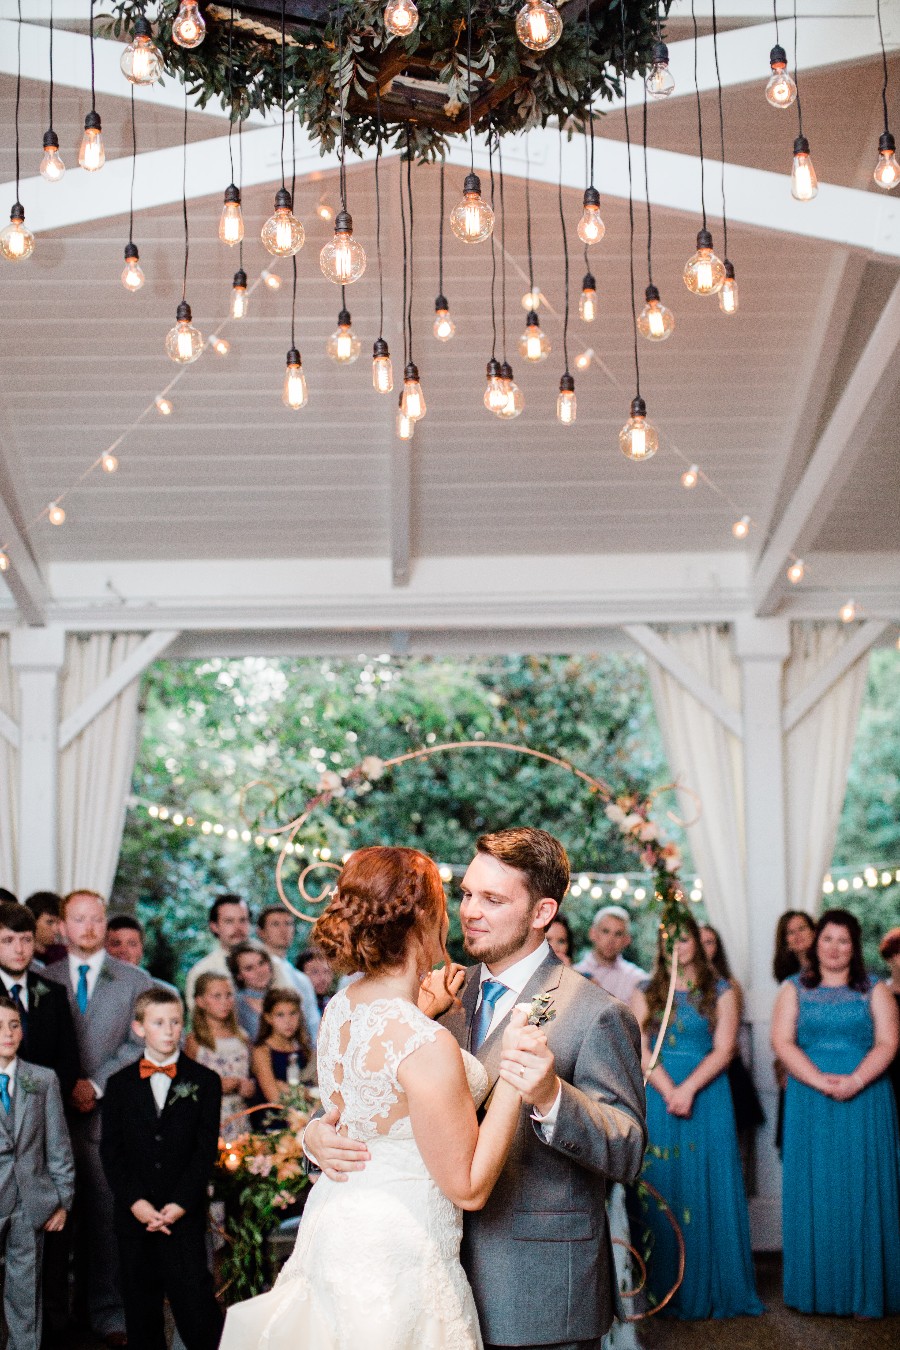 Whimsical Nashville Garden Wedding in Coral, Peach, Copper and Dusty ...